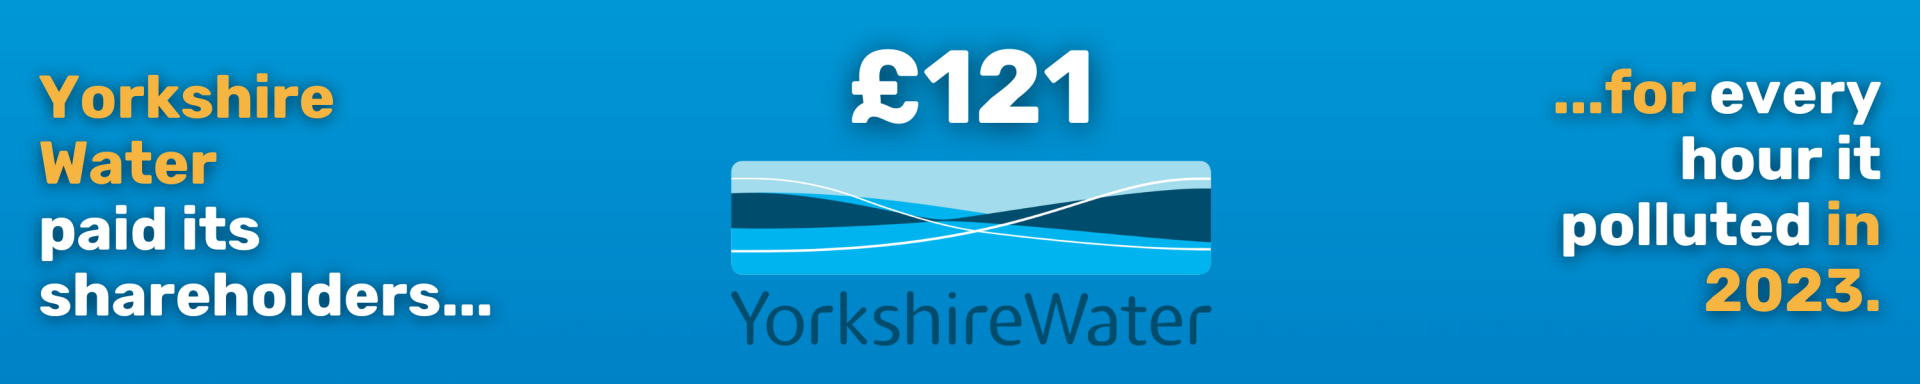 Text reads: "YorkshireWater paid its shareholders £121 for every hour it polluted in 2023."